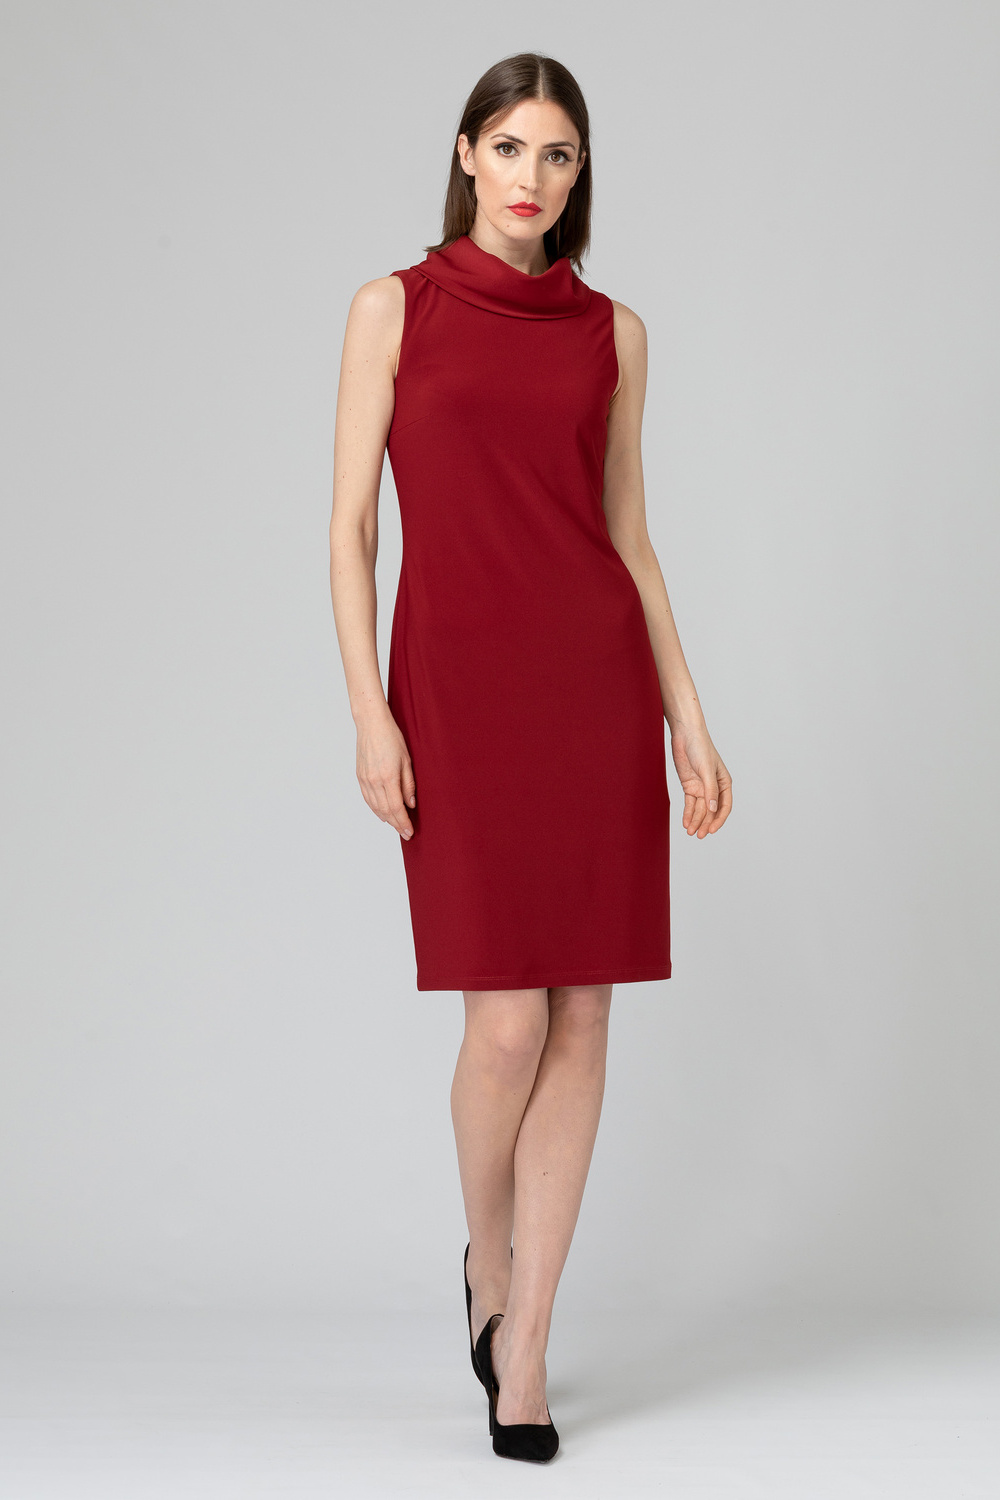 Joseph Ribkoff Robe style 193012. Rouge Impérial 193